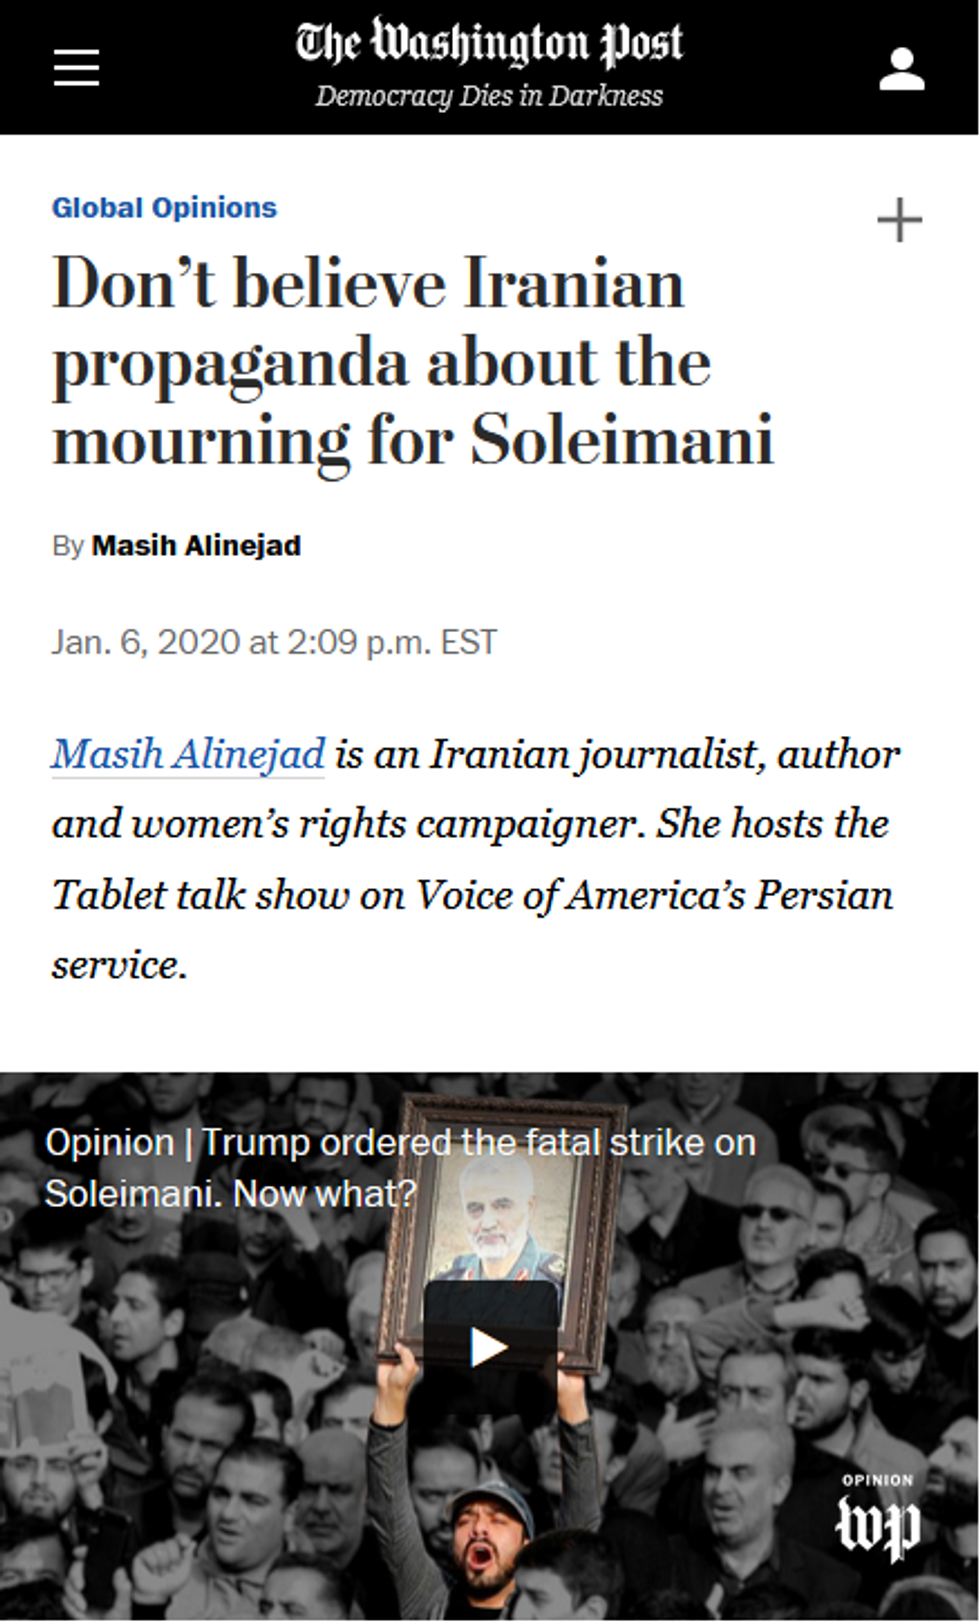 WaPo: Don't believe Iranian propaganda about the mourning for Soleimani